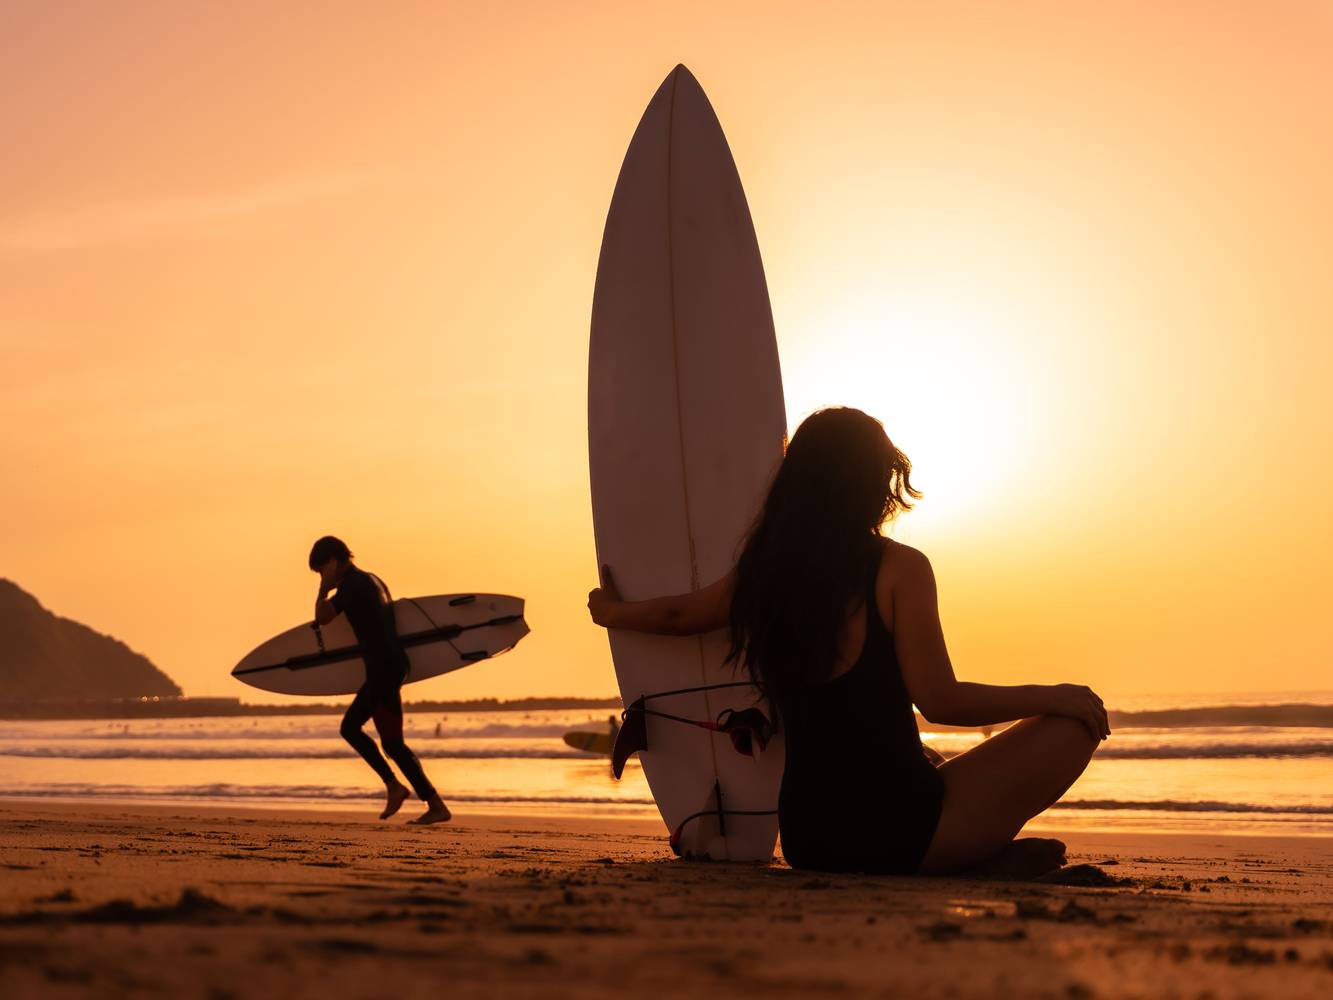 A Silhouette of a female from behind holding the surfboard with another surfer and a sunset view in the background